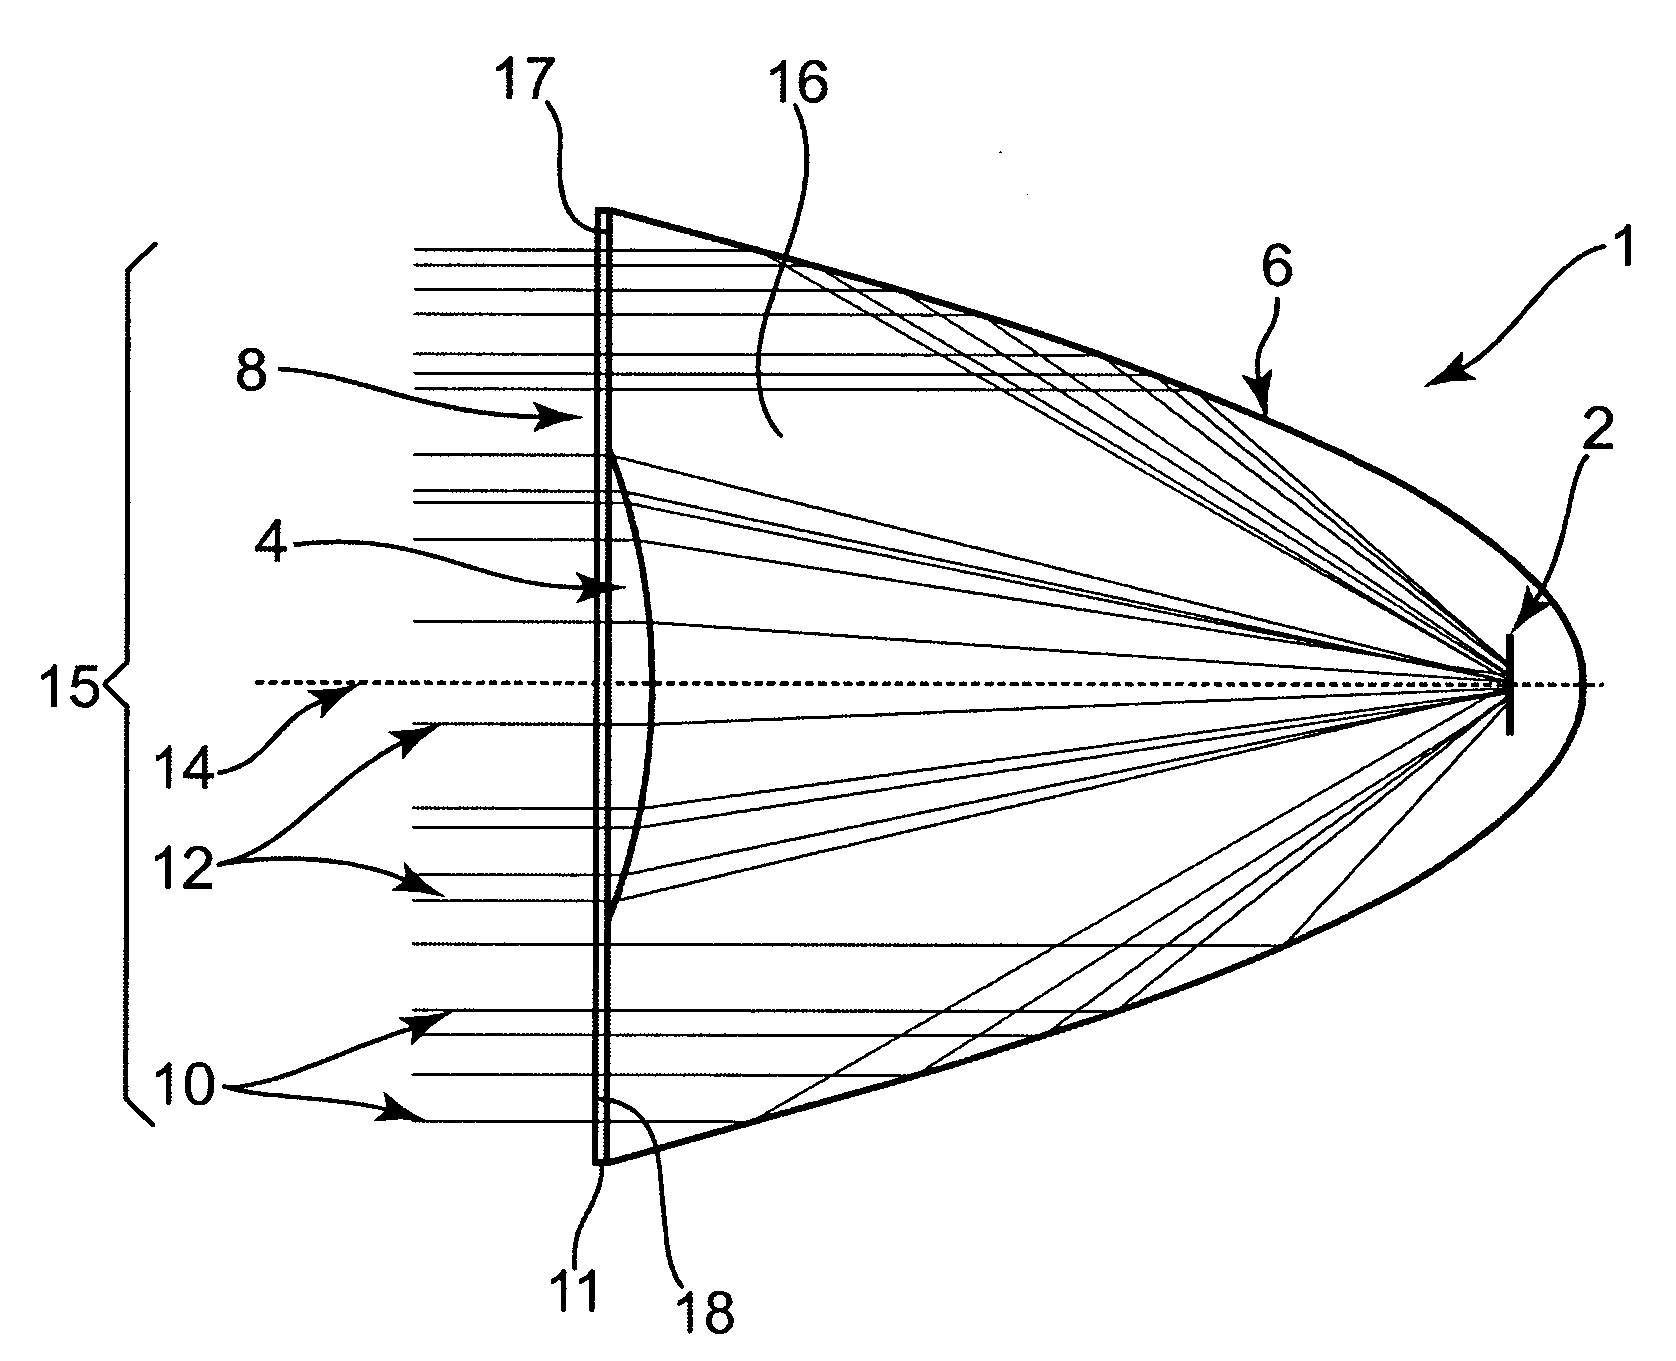 Photovoltaic receiver for solar concentrator applications